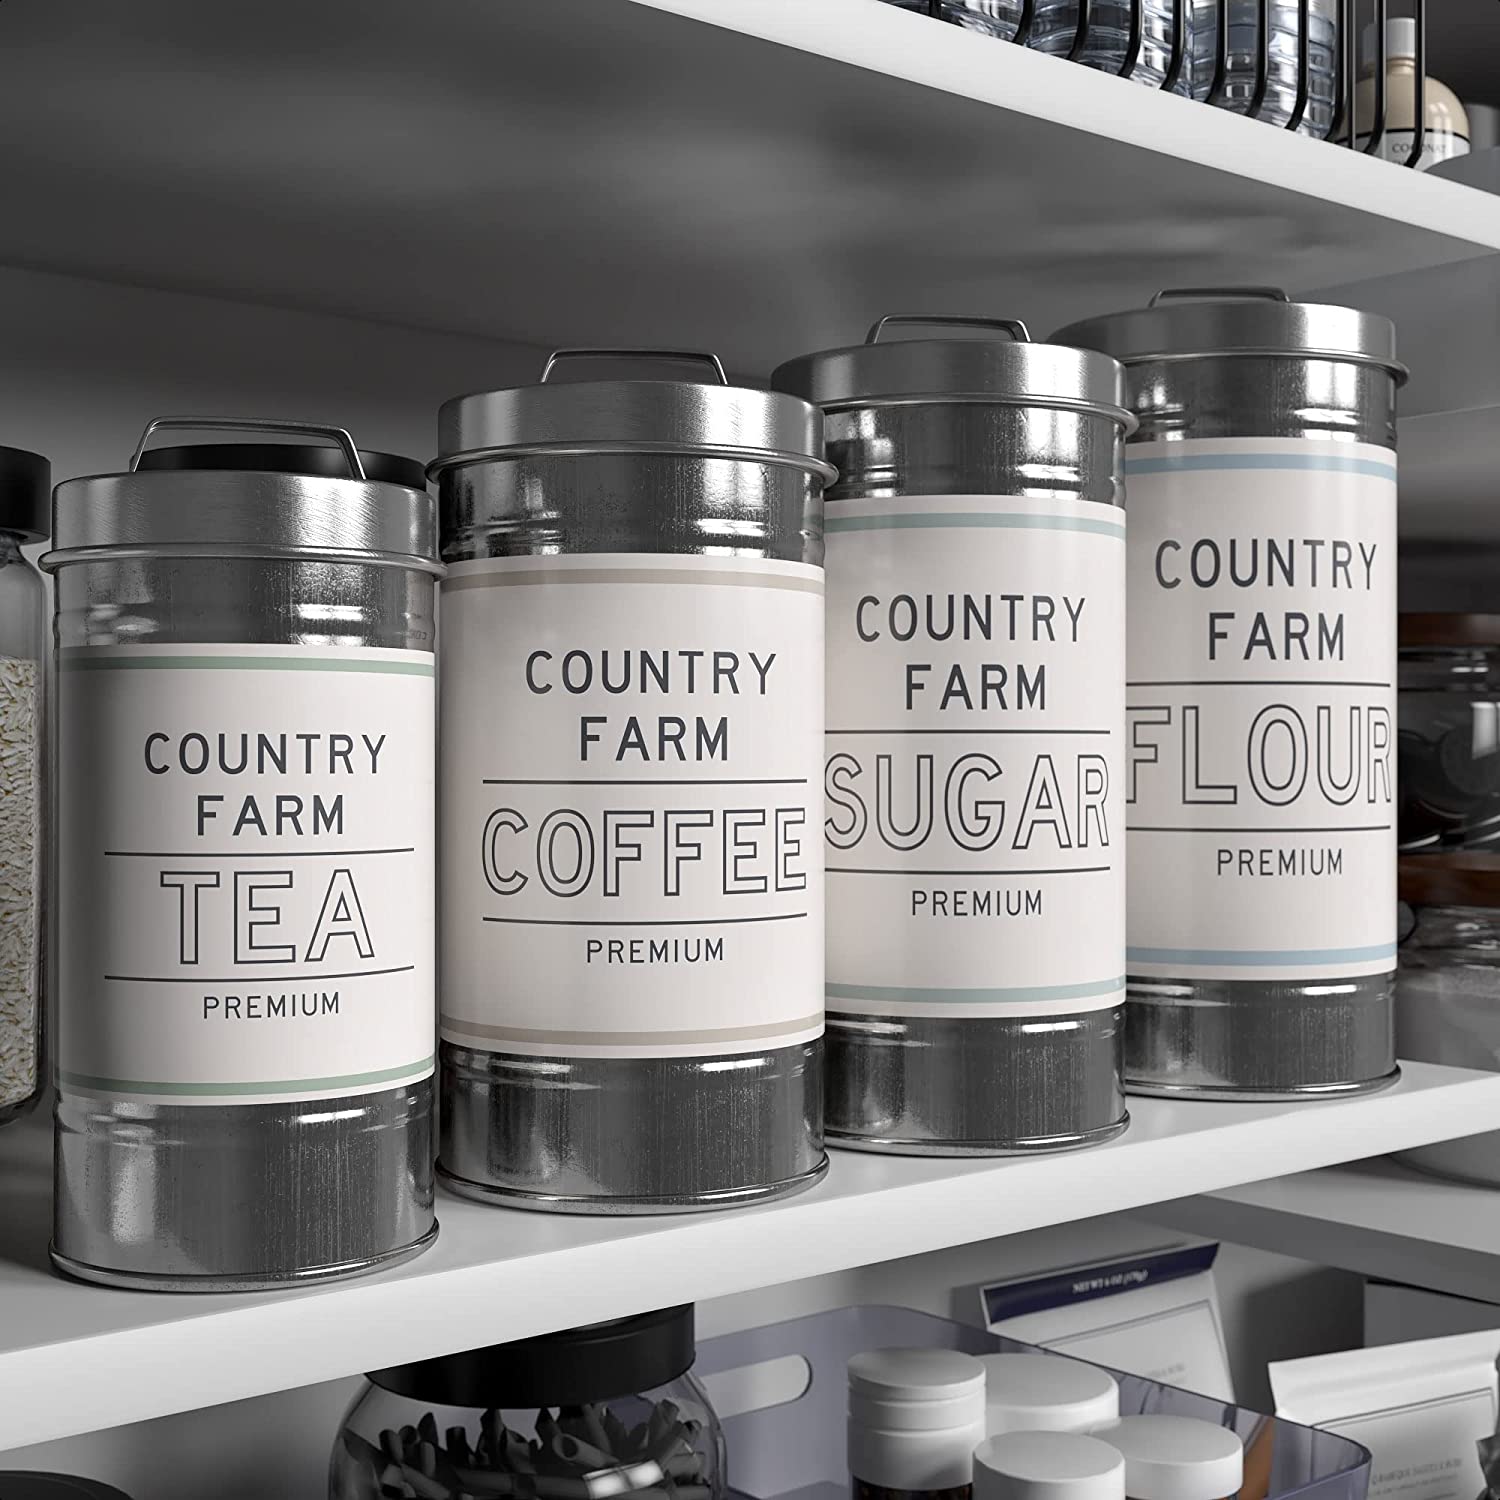 Barnyard Designs Canister Sets for Kitchen Counter Vintage Kitchen Canisters, Country Rustic Farmhouse Decor Kitchen, Coffee Tea Sugar Farmhouse